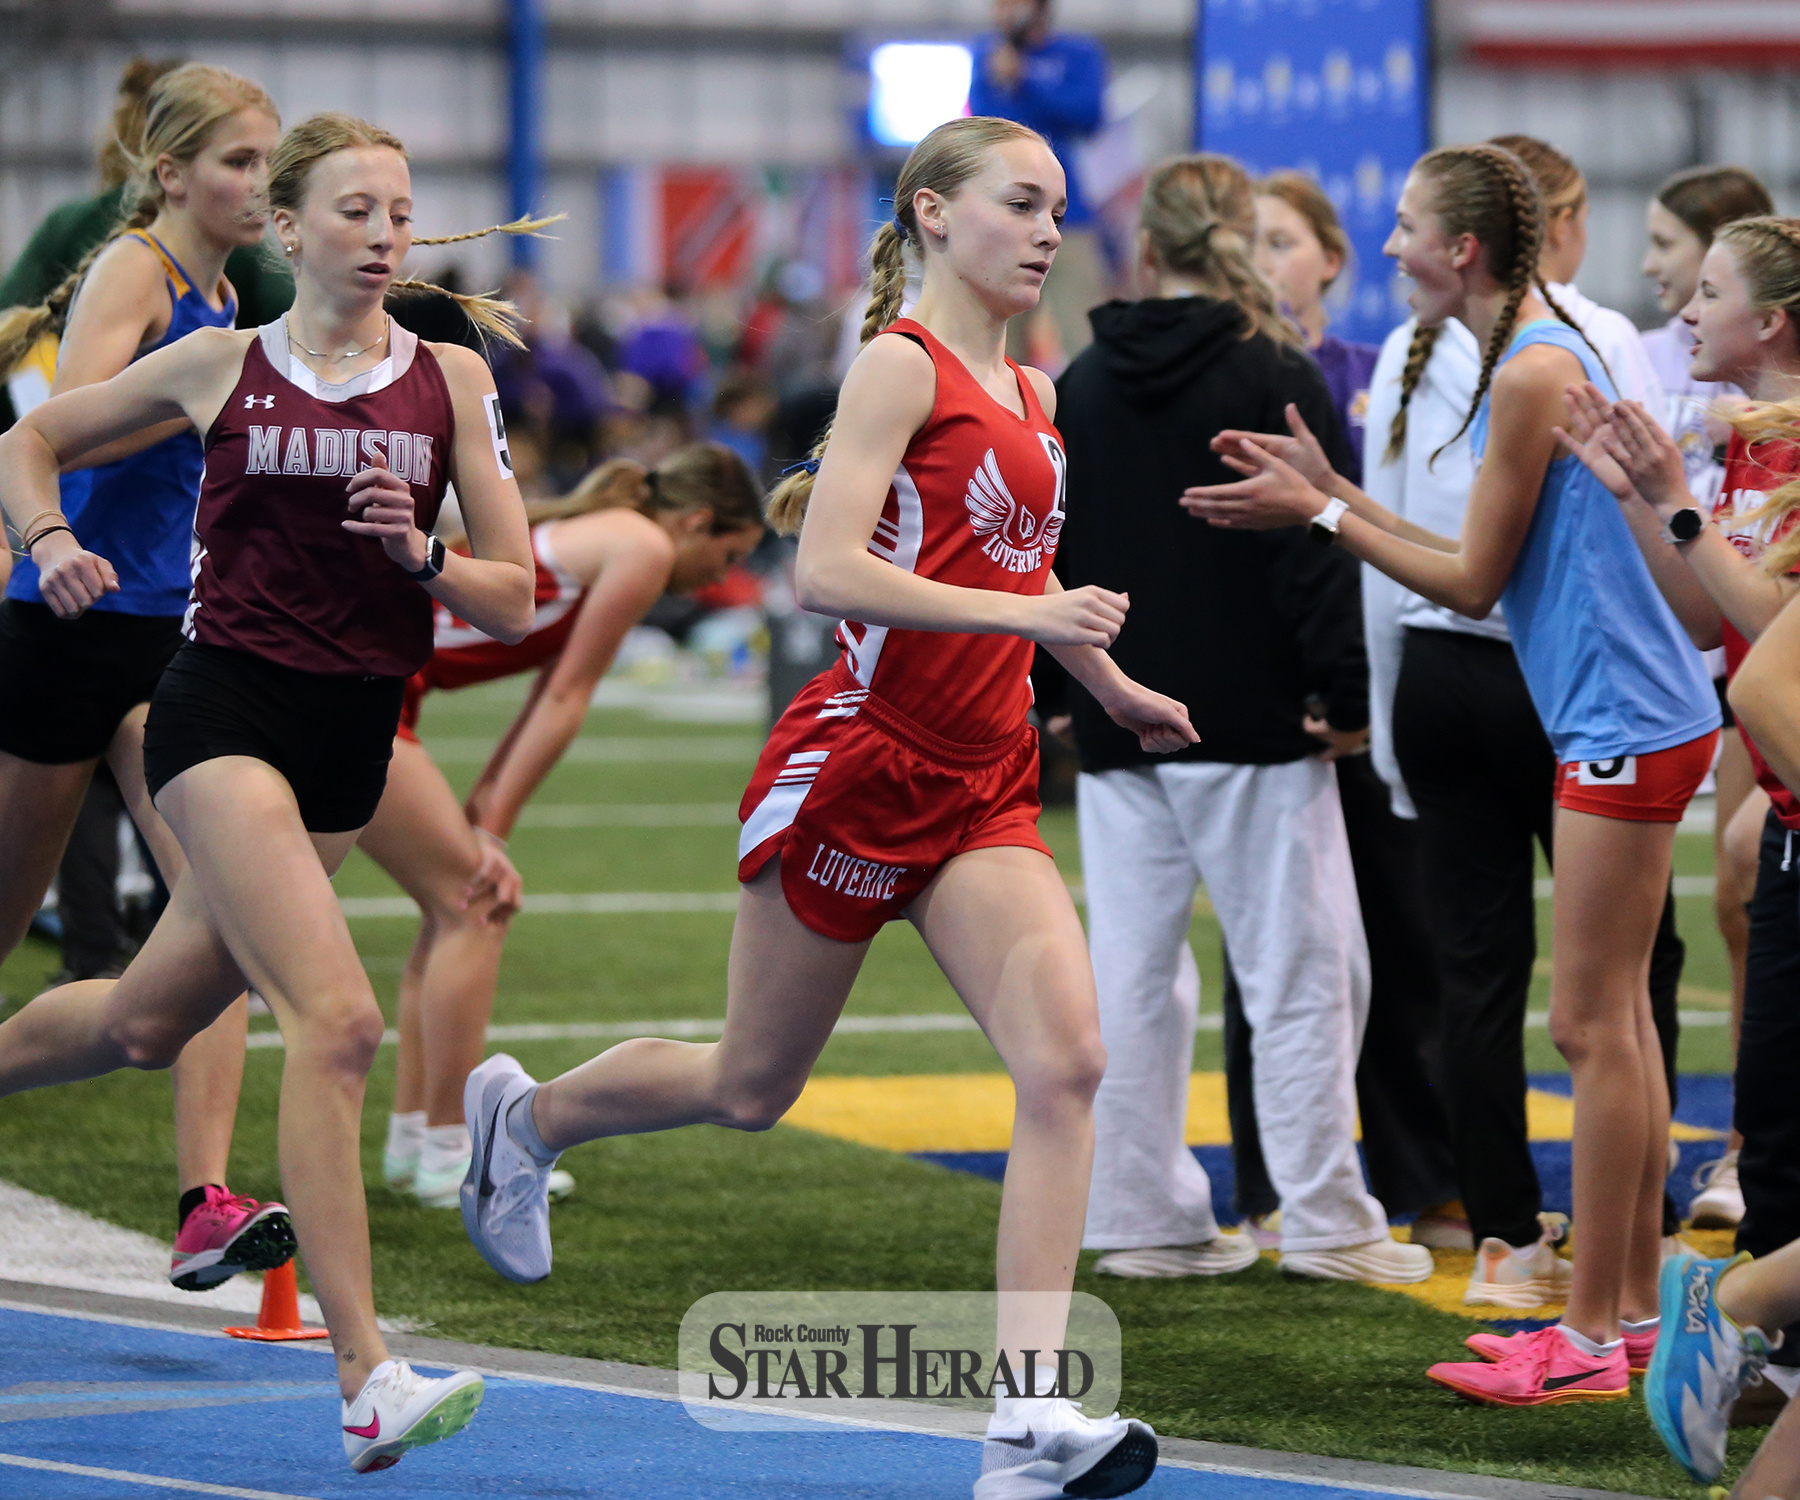 Senior Jenna DeBates focuses on her 1600-meter race Saturday, March 23, in Brookings. She finished in third place after pushing her way toward the front at the end of the race.